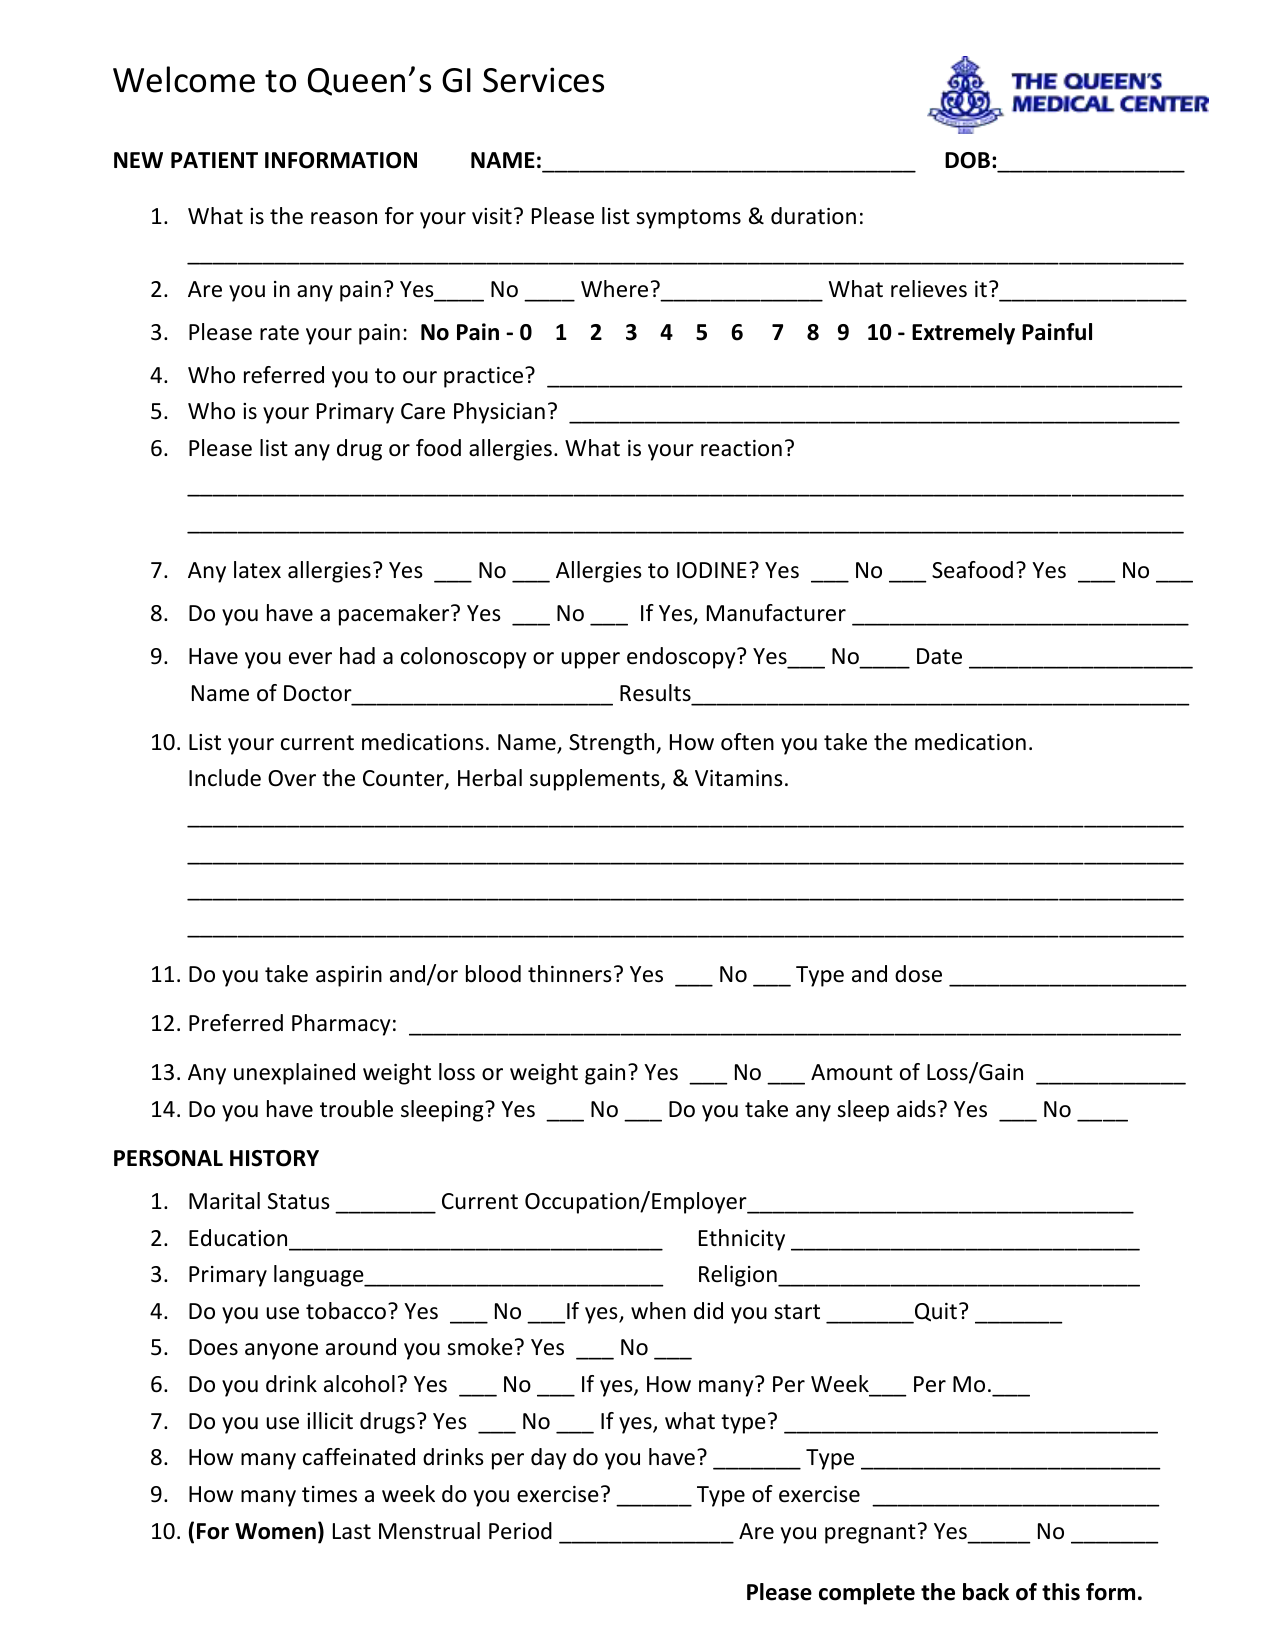 New Patient Information Form Template